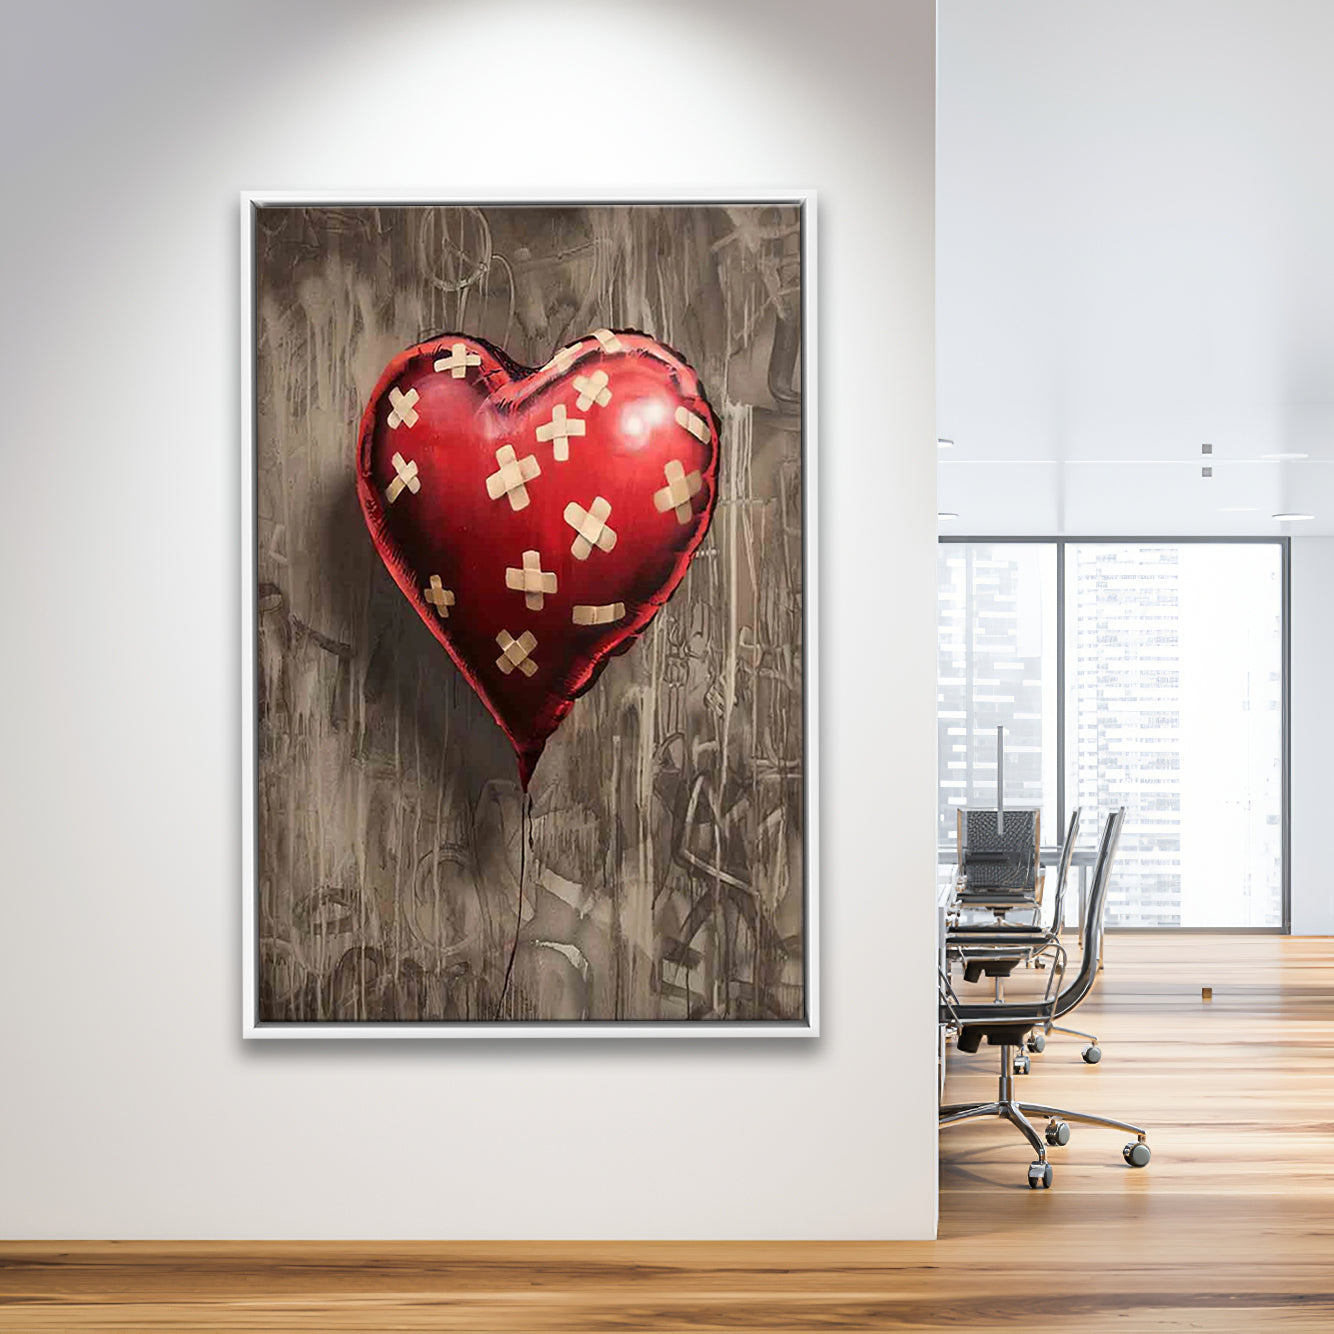  Personalized Romantic Valentine's Day – Easel Backed Tabletop  or Wall Art. Perfect for Wedding Anniversary. (17 - Heart Balloon (Banksy  Style)): Posters & Prints